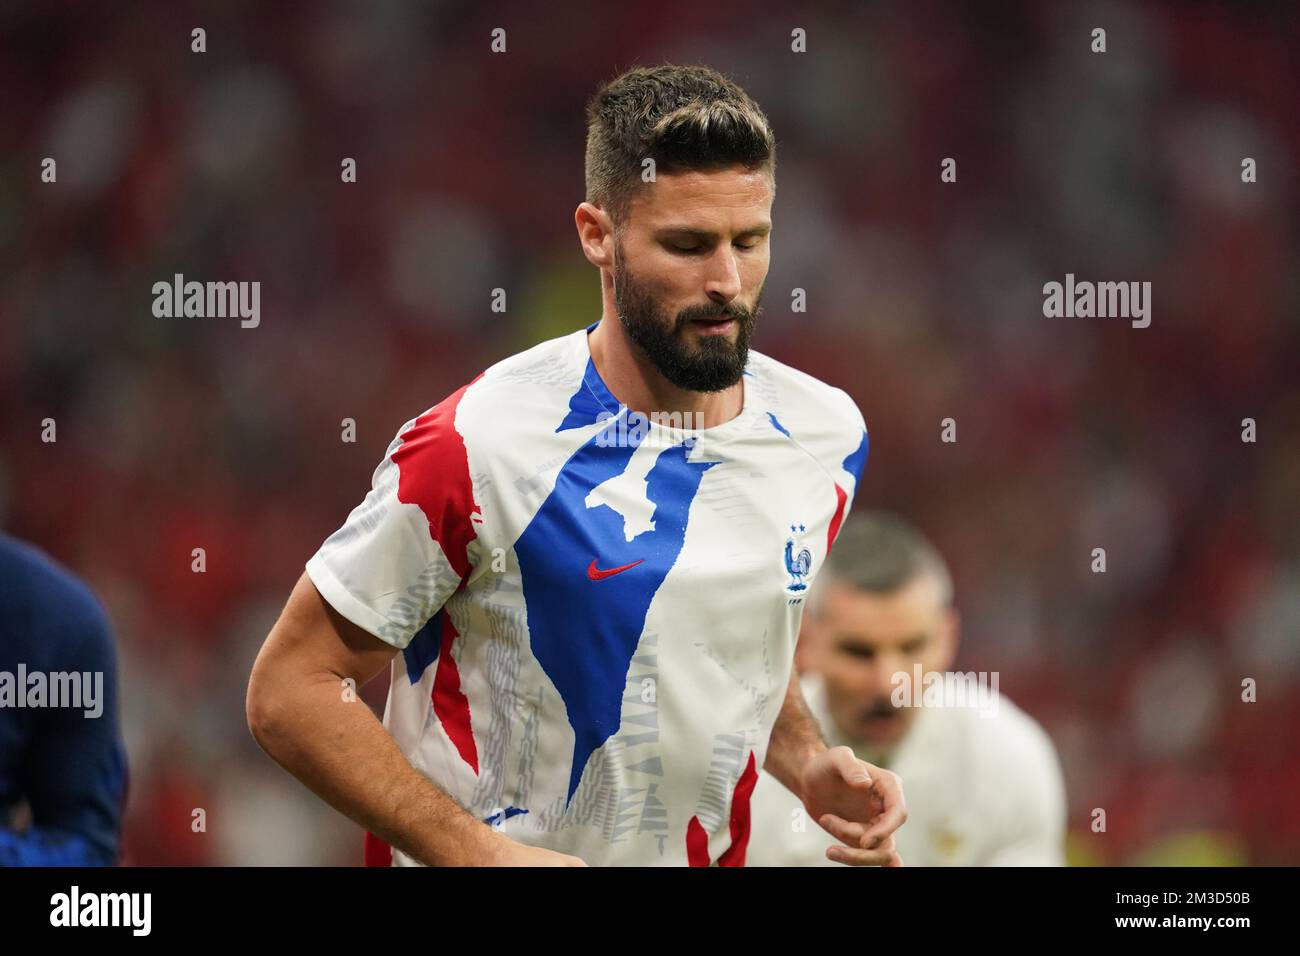 DOHA, QATAR - DECEMBER 14: Player of France Olivier Giroud warms up before the FIFA World Cup Qatar 2022 Semi-finals match between France and Morocco at Al Bayt Stadium on December 14, 2022 in Al Khor, Qatar. (Photo by Florencia Tan Jun/PxImages) Credit: Px Images/Alamy Live News Stock Photo